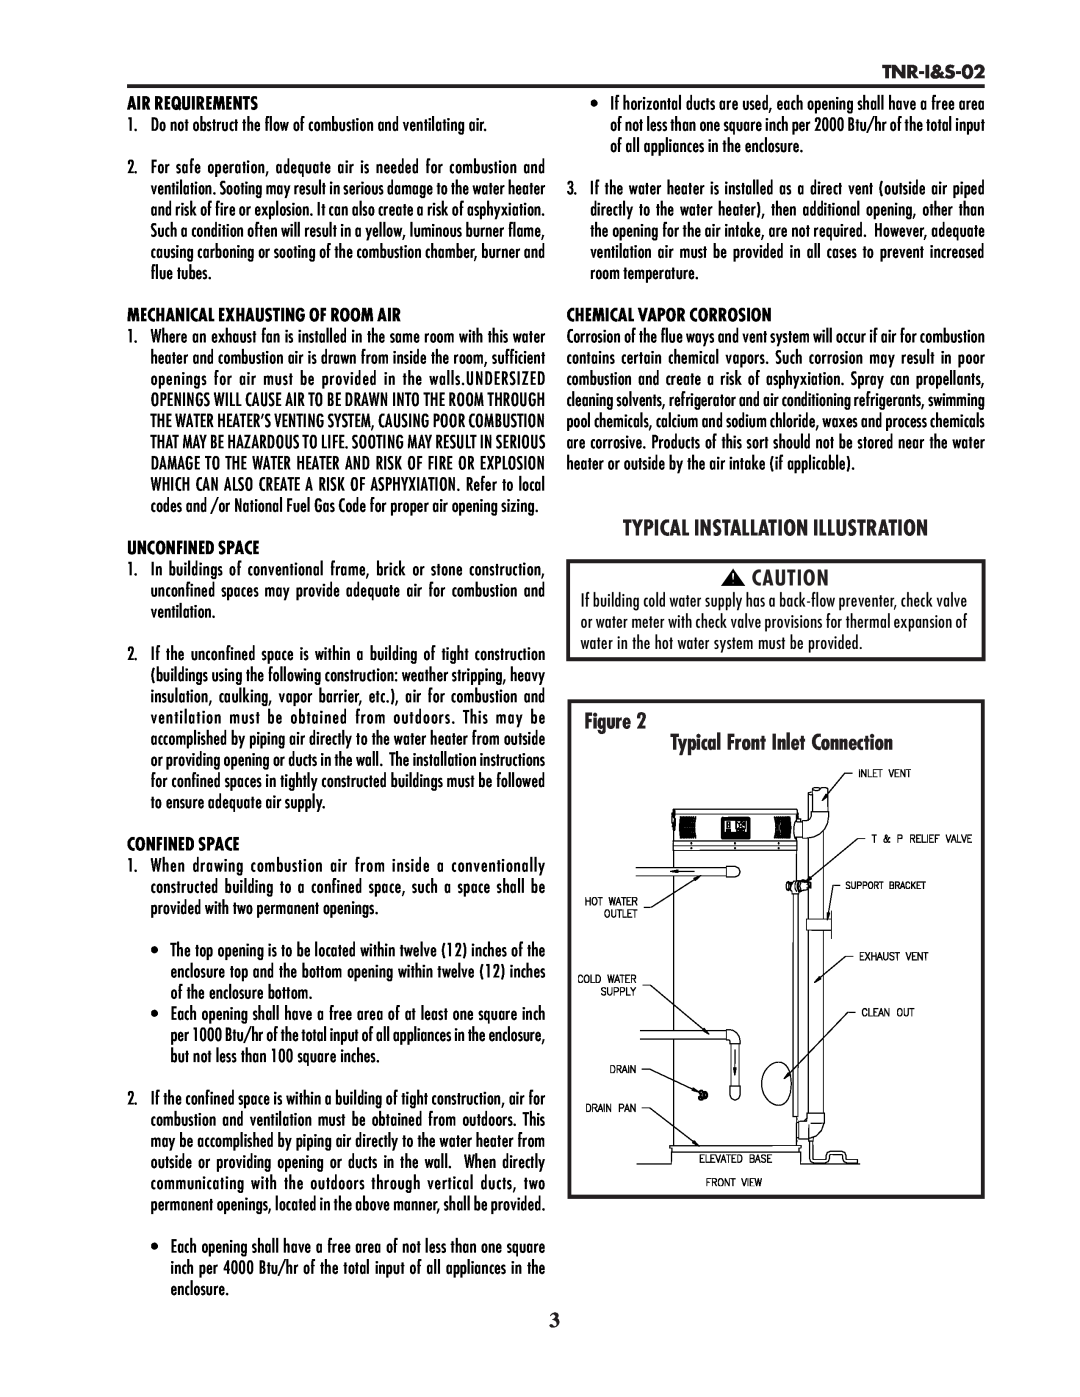 Lochinvar TNR-I&S-02 service manual Typical Installation Illustration, Air Requirements, Mechanical Exhausting Of Room Air 